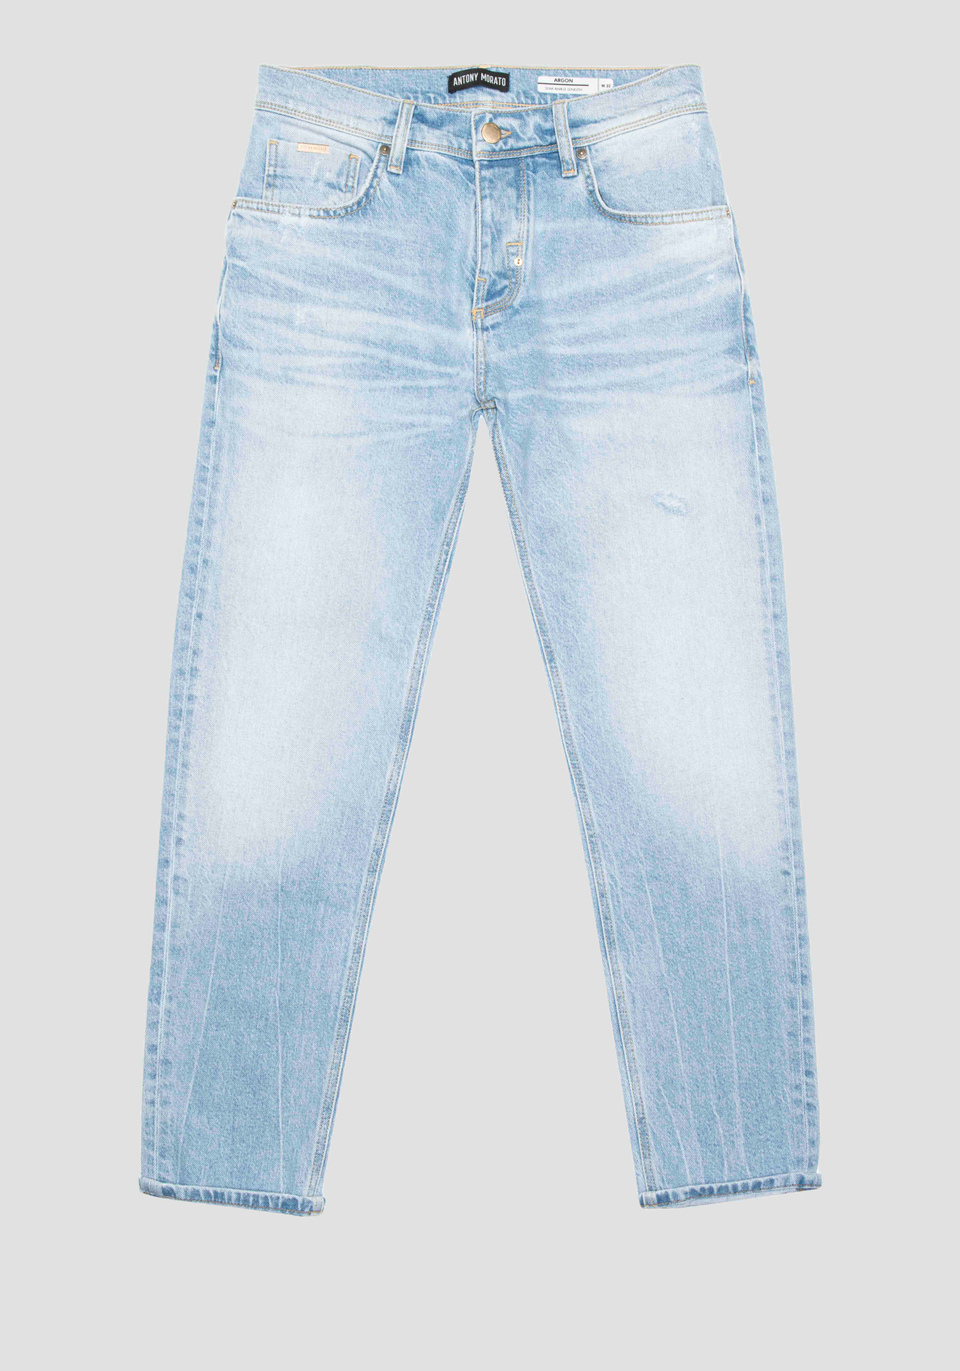 "ARGON" SLIM ANKLE LENGTH FIT JEANS IN BLUE COMFORT DENIM WITH AN AUTHENTIC LOOK - Antony Morato Online Shop